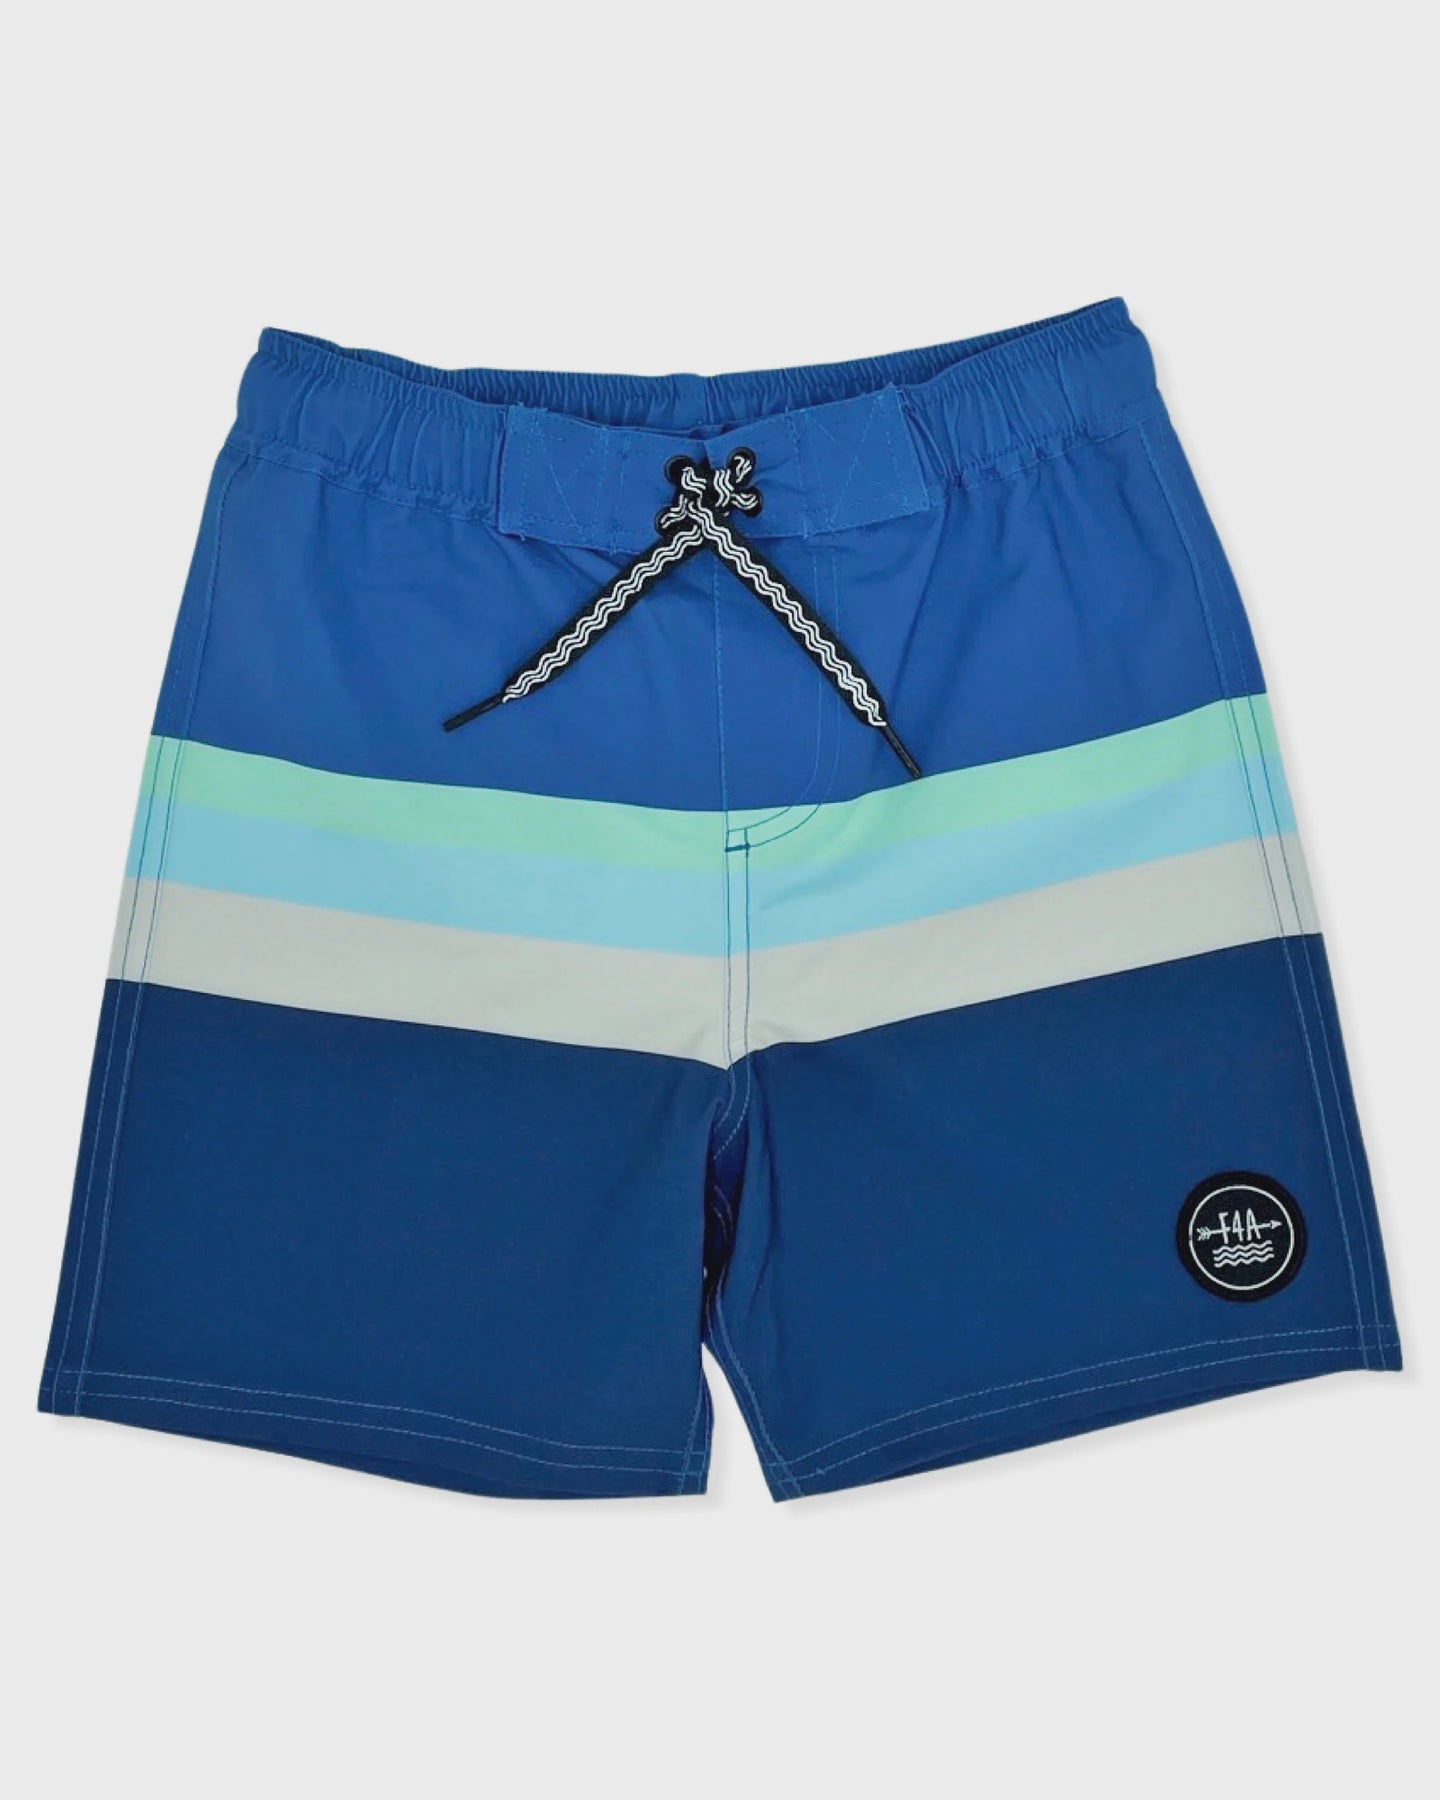 Feather 4 Arrow - Voyager Baby Boardshort/Navy